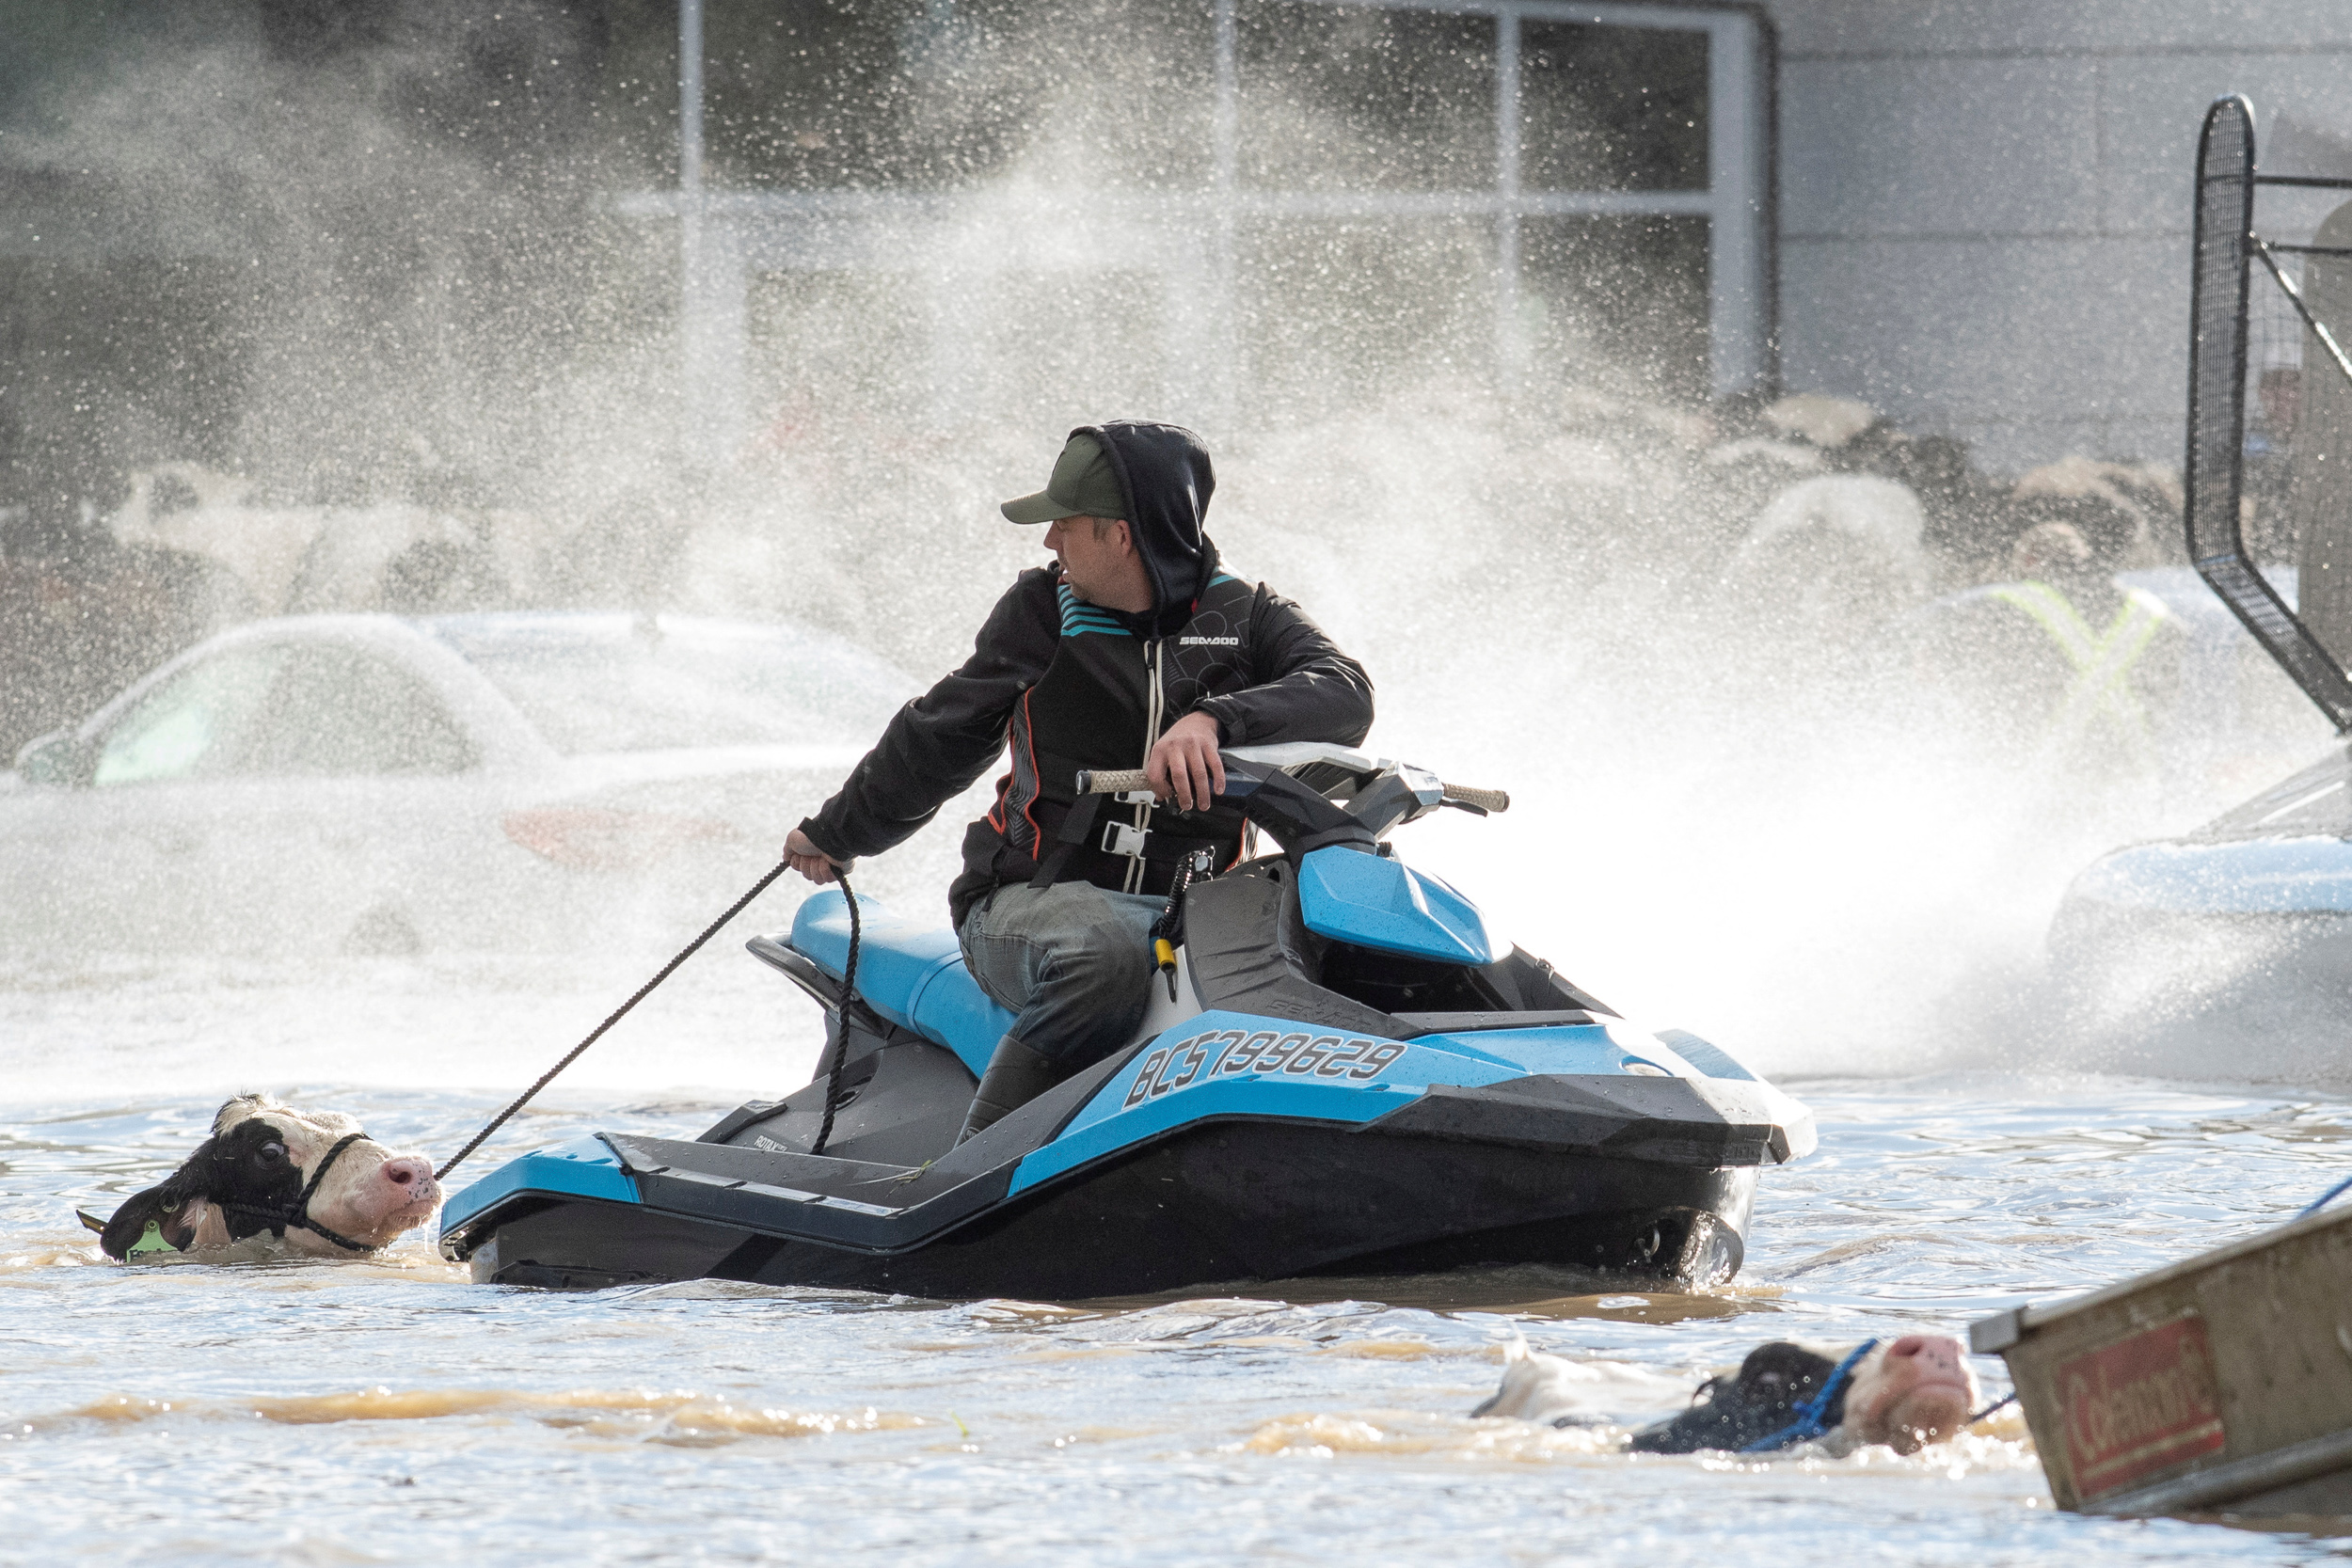 Ryan Gemser on rescuing cattle by Sea-Doo during the BC floods in November (Jennifer Gauthier/Reuters)